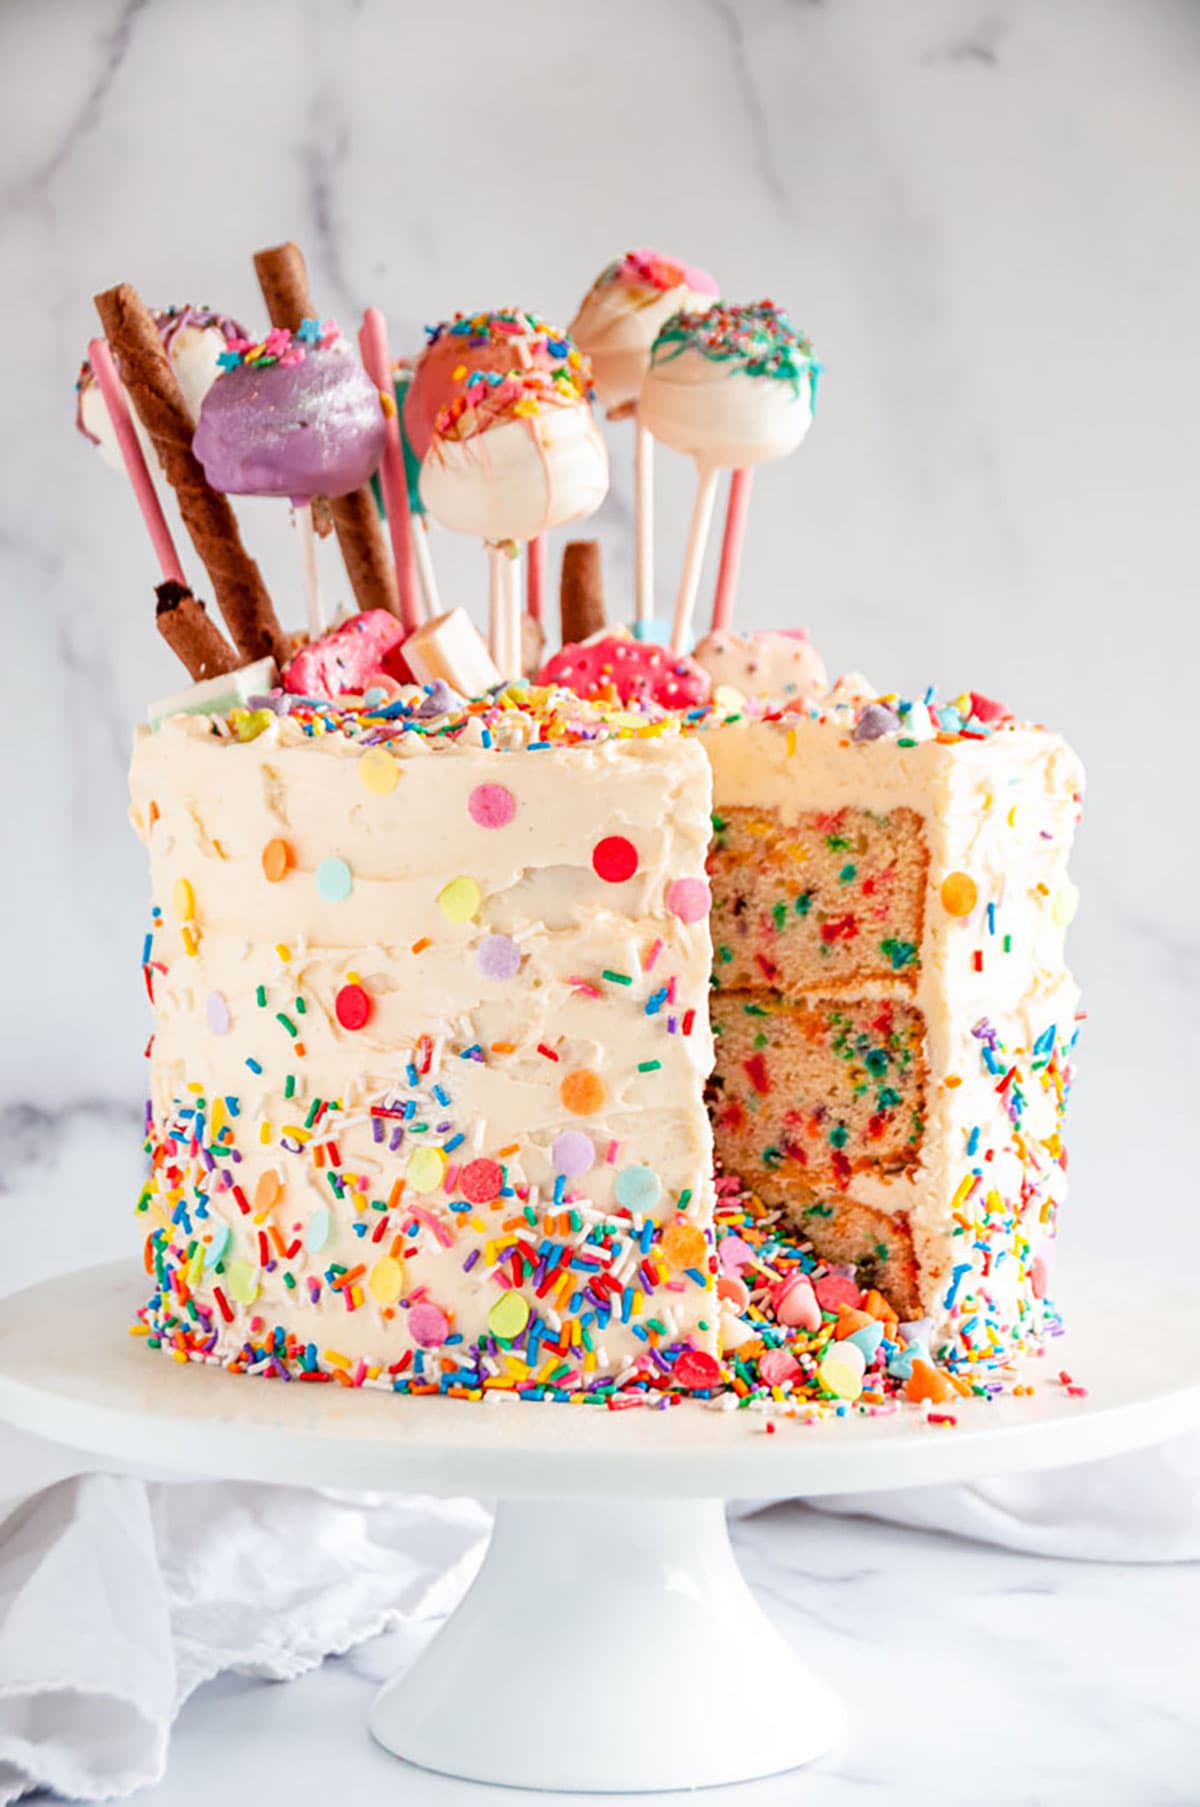 5 Great Ideas for Surprise Birthday Cake for Boyfriend - FNP SG